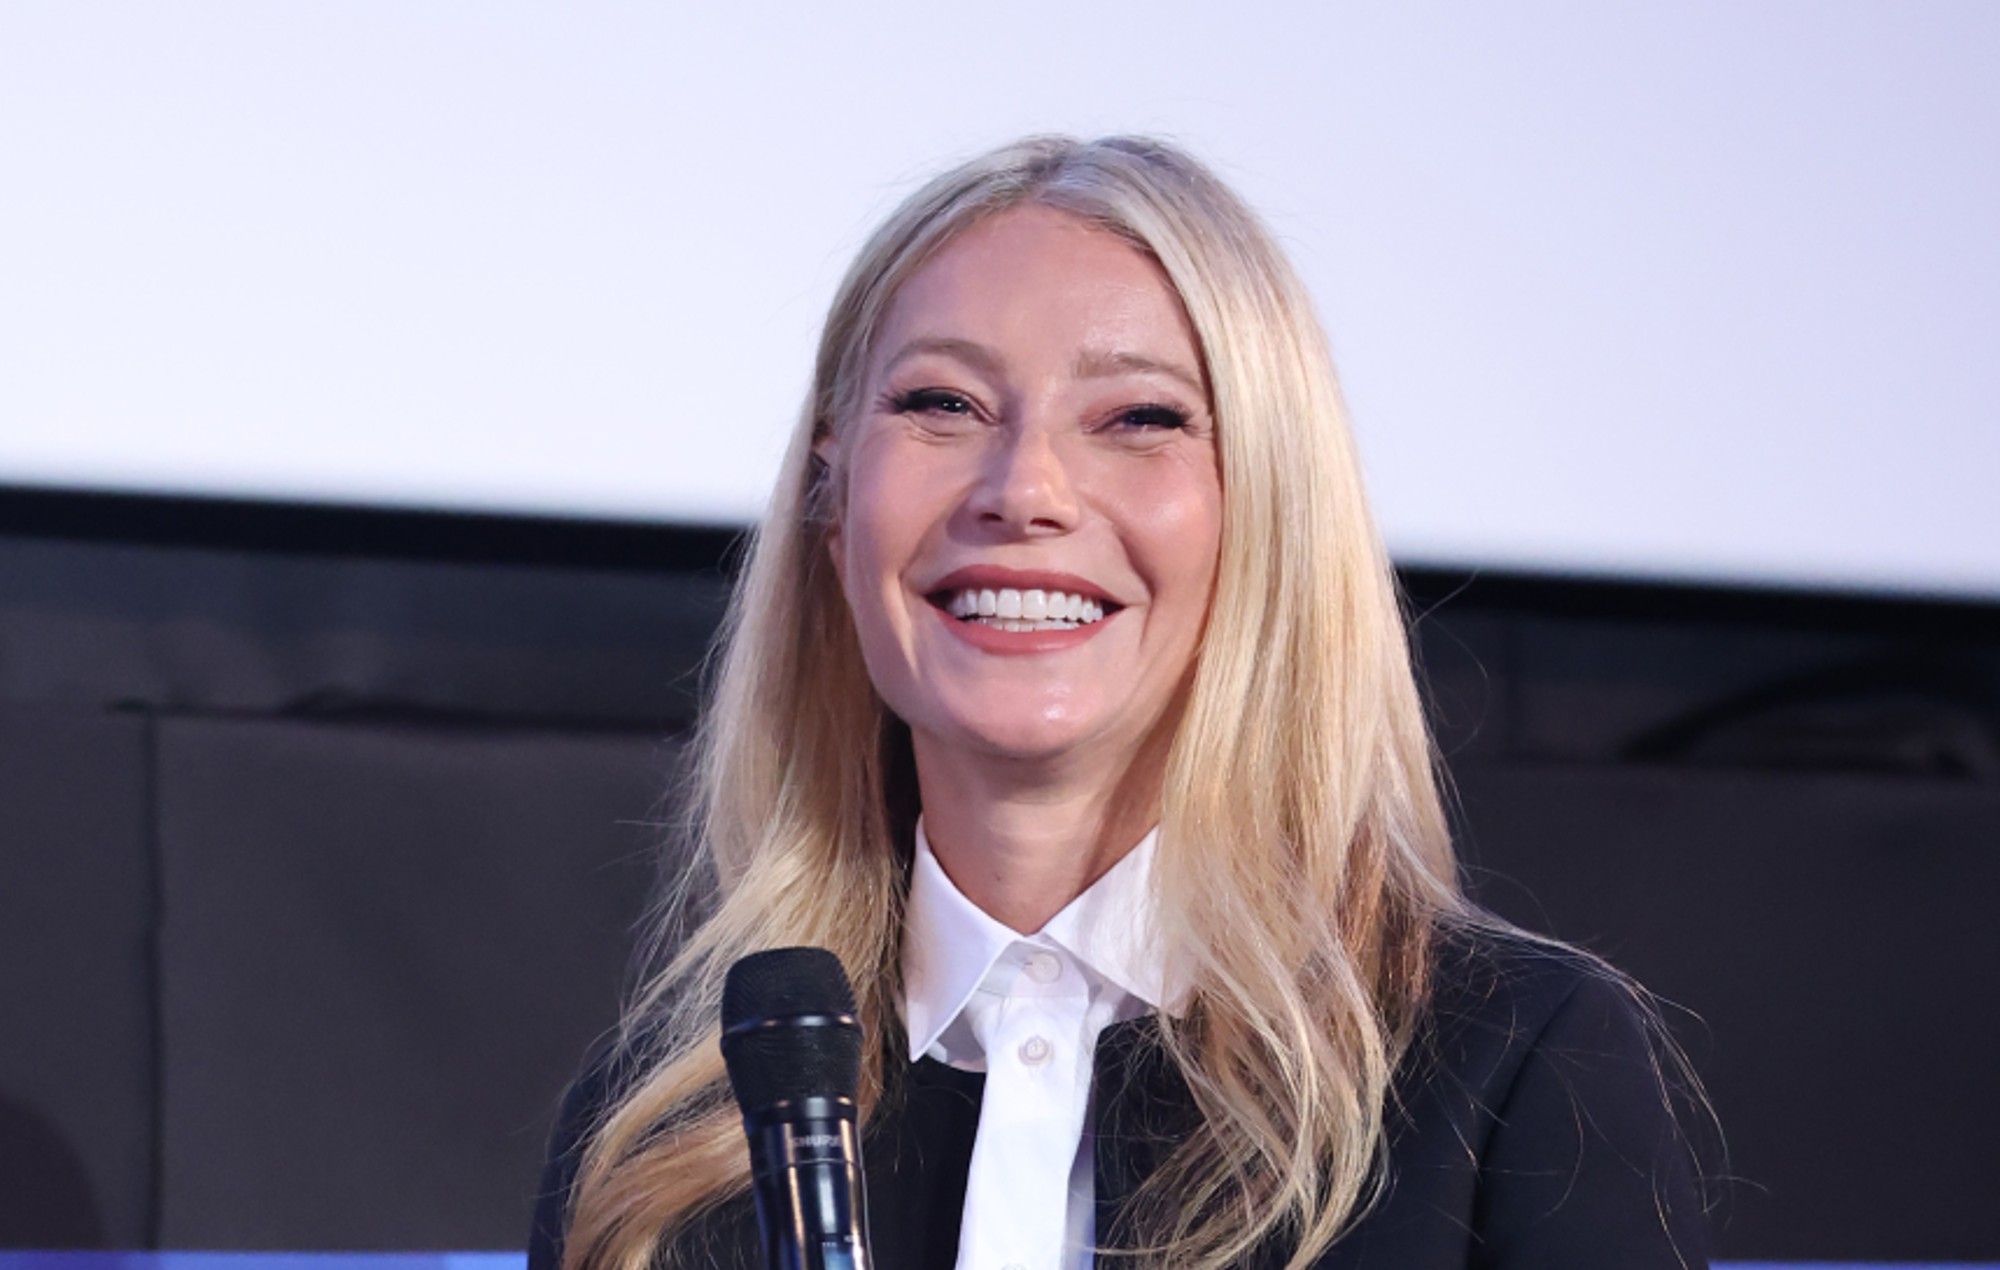 Gwyneth Paltrow hasn’t seen ‘Avengers: Endgame’: “I stopped watching Marvel movies at some point”